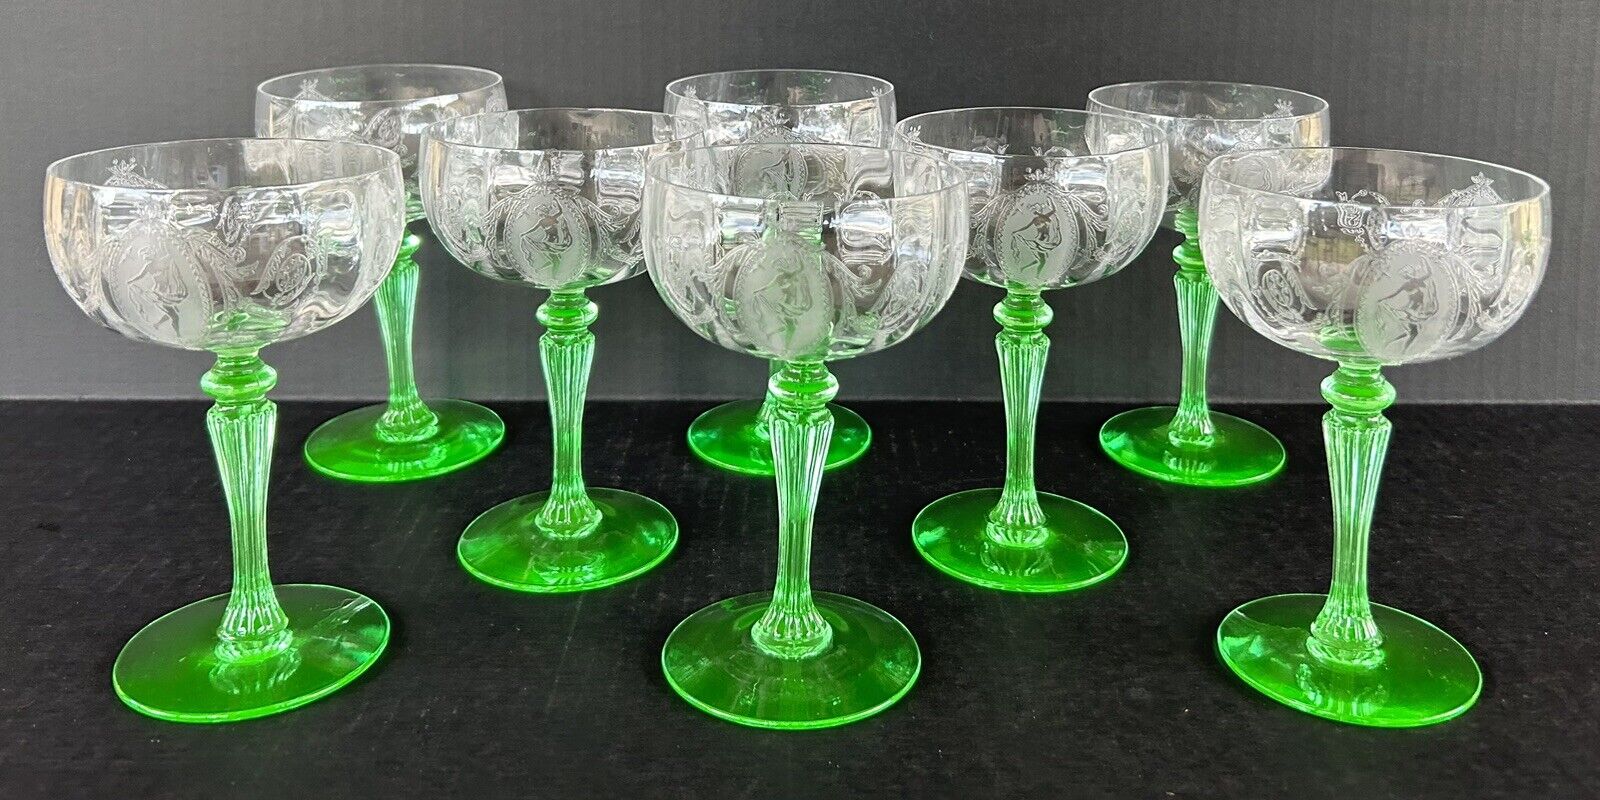 Tiffin Glass Classic Green Uranium Stem Nymph Etched Champagne Glasses Set of 8